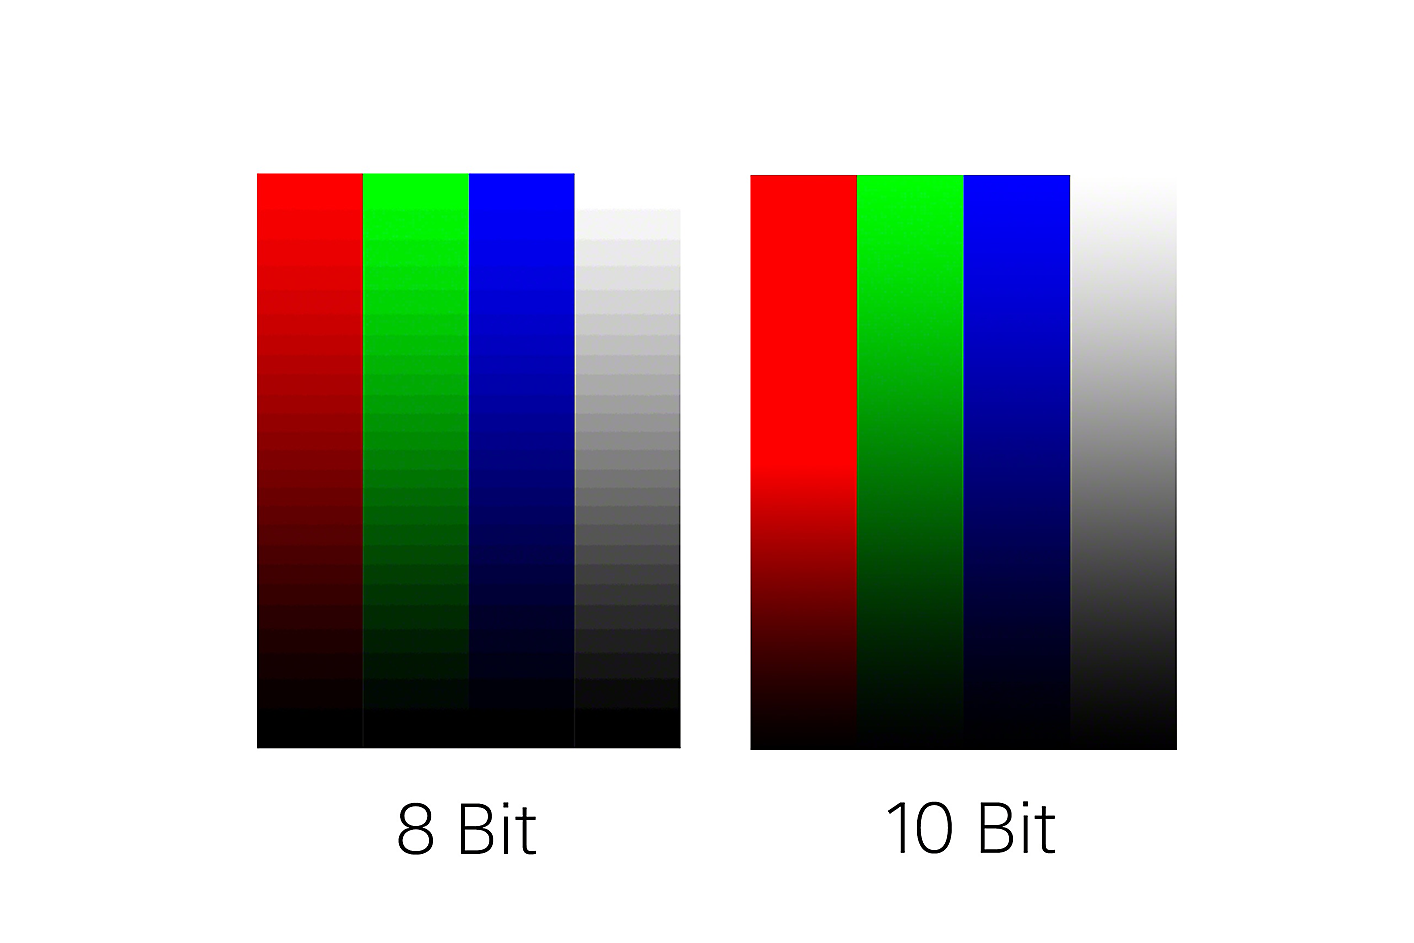 Graphic comparing an 8 Bit display with a 10 Bit display